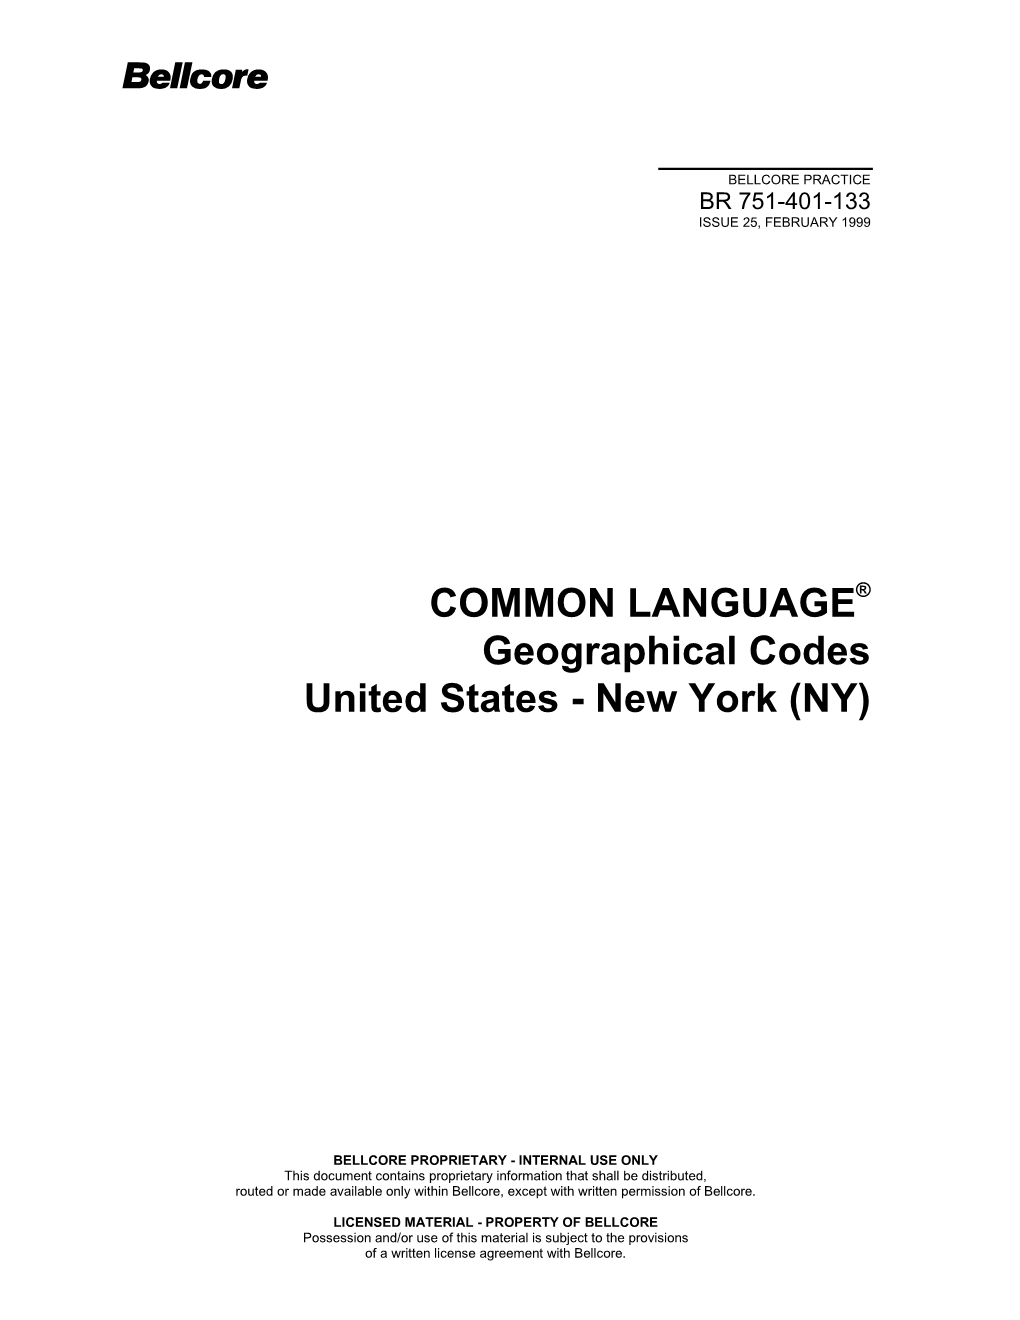 Geographical Codes United States - New York (NY)